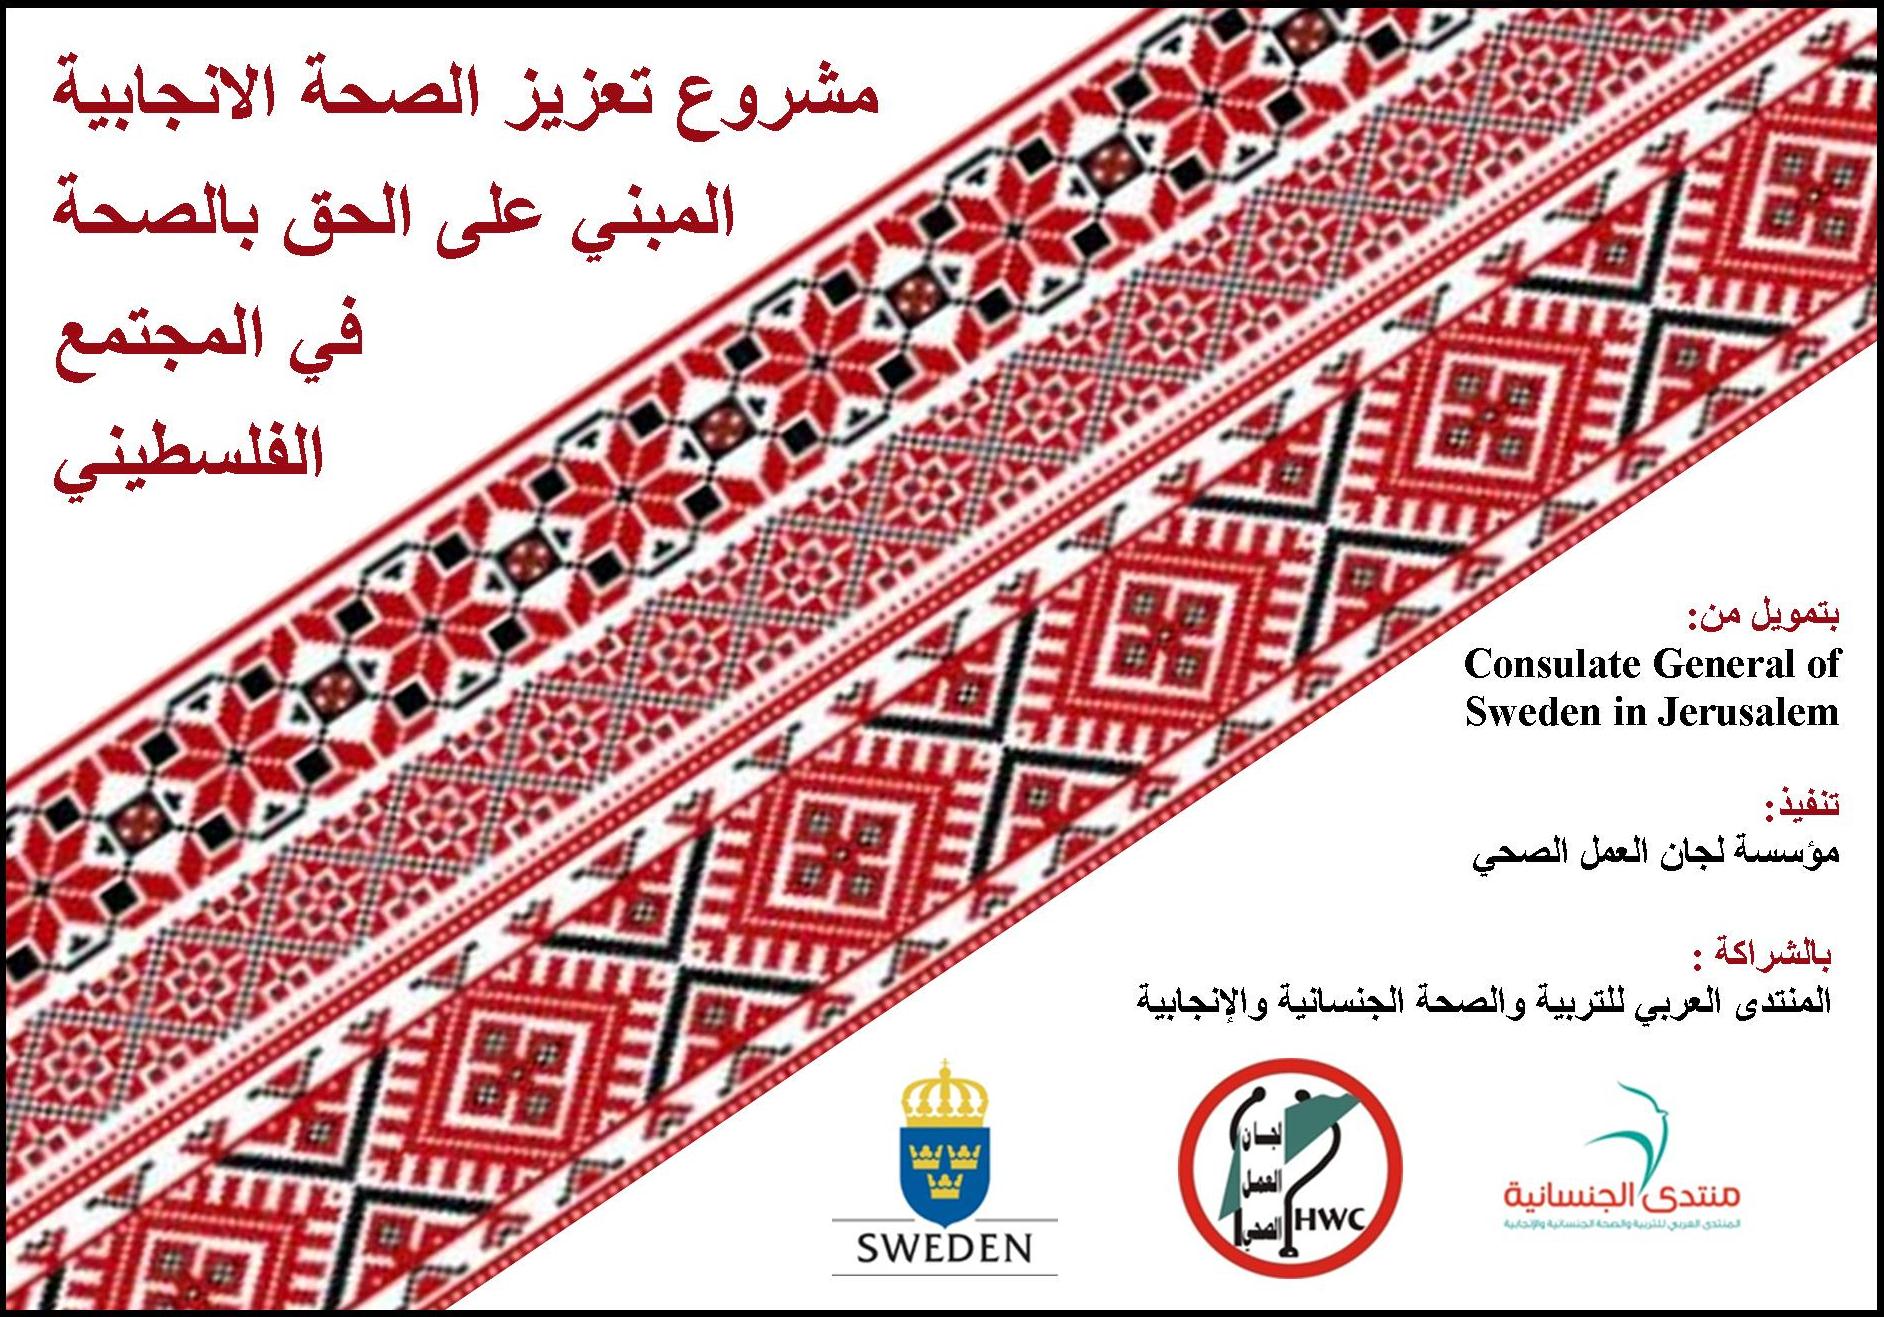  sexuality and reproductive health and rights project among the Palestinian society 